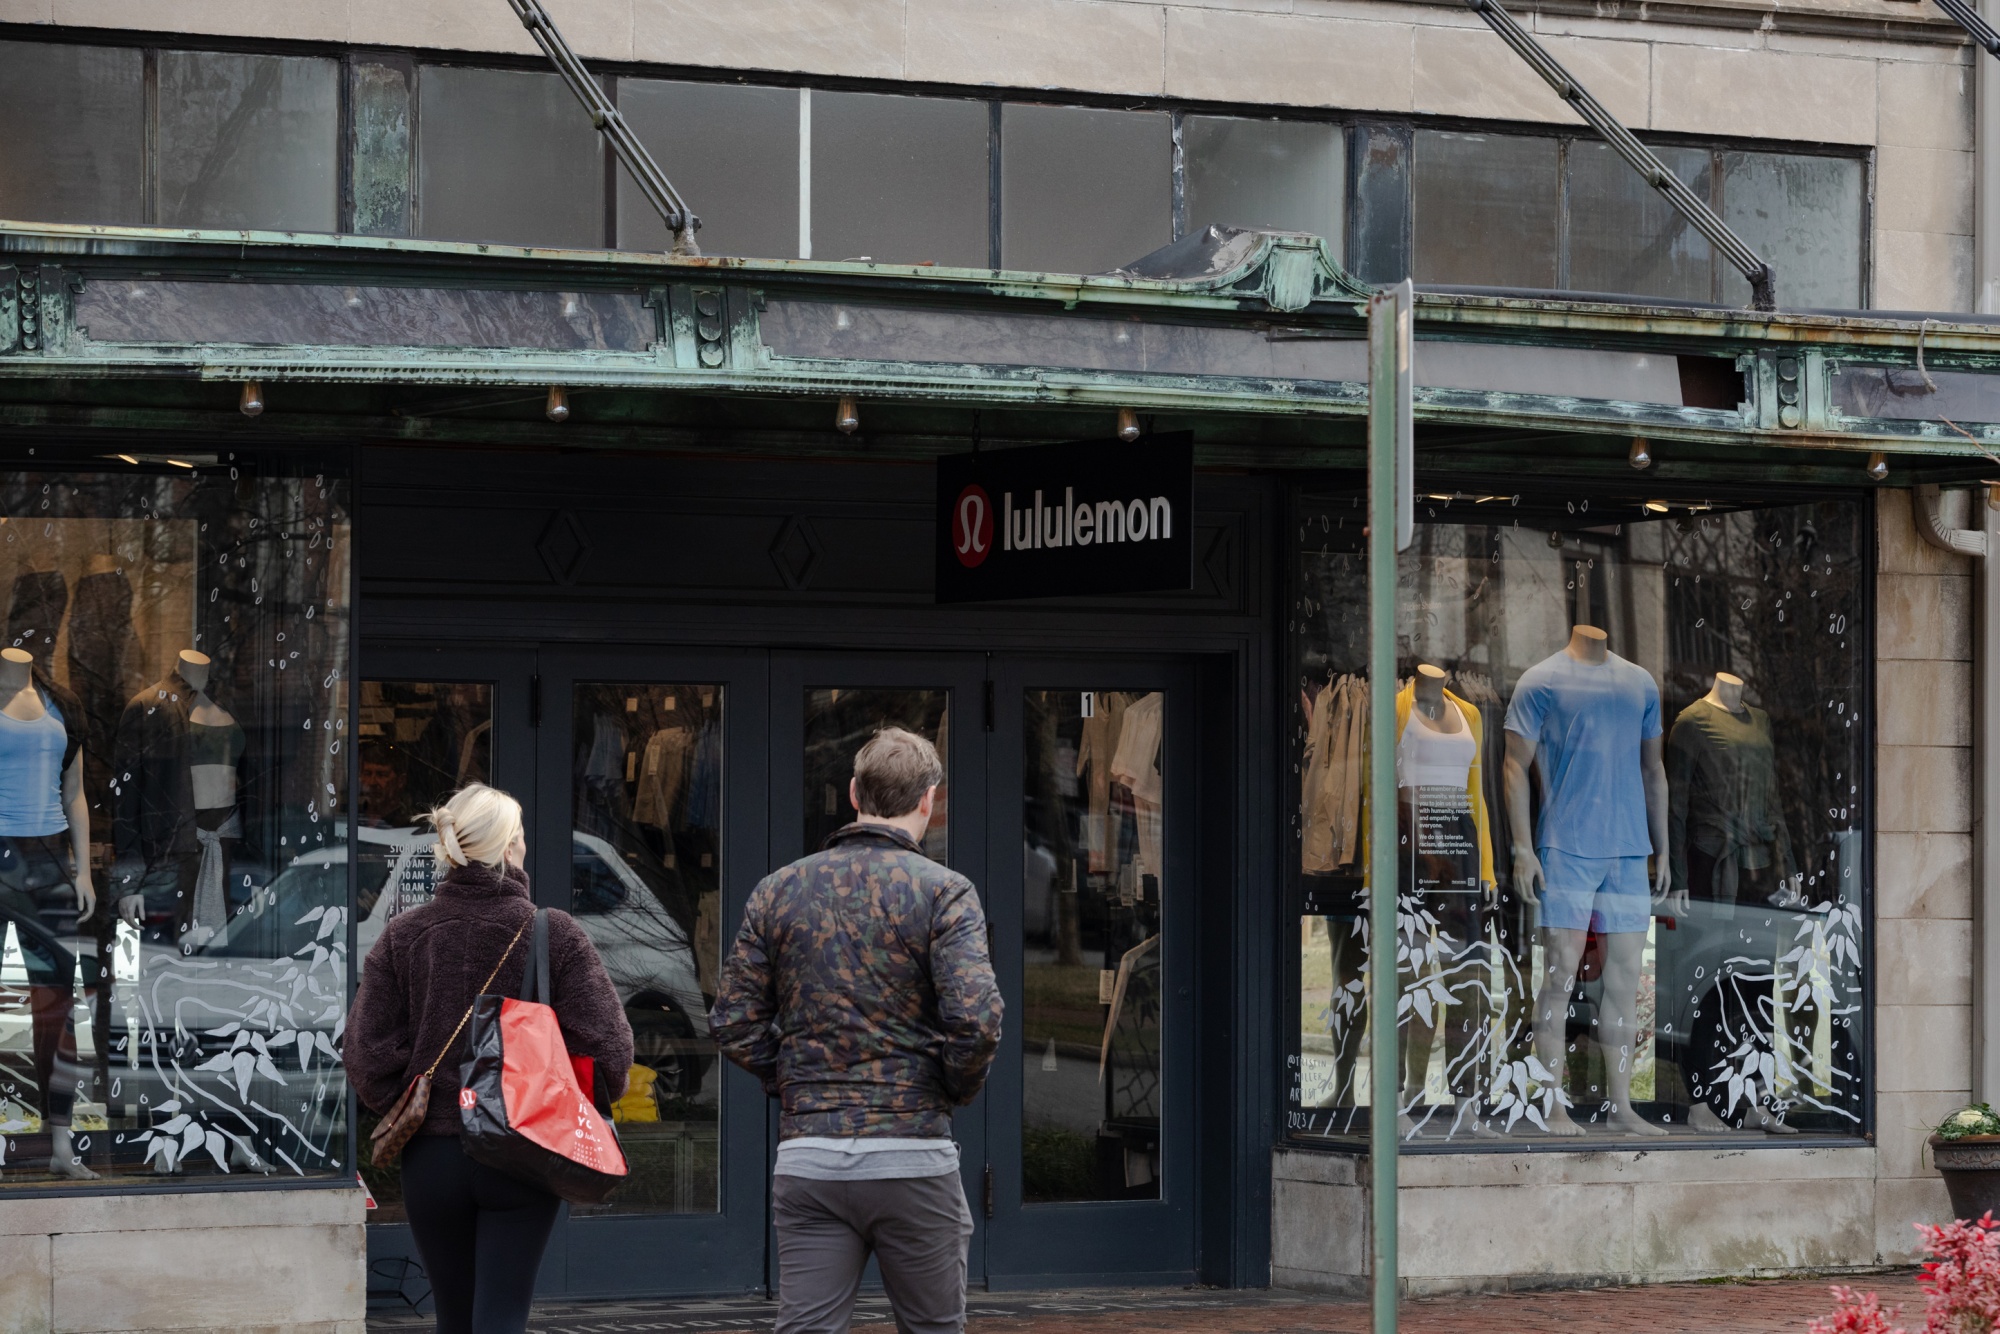 Stand.Earth Protests Lululemon For Dirty Sneakers As It Escalates